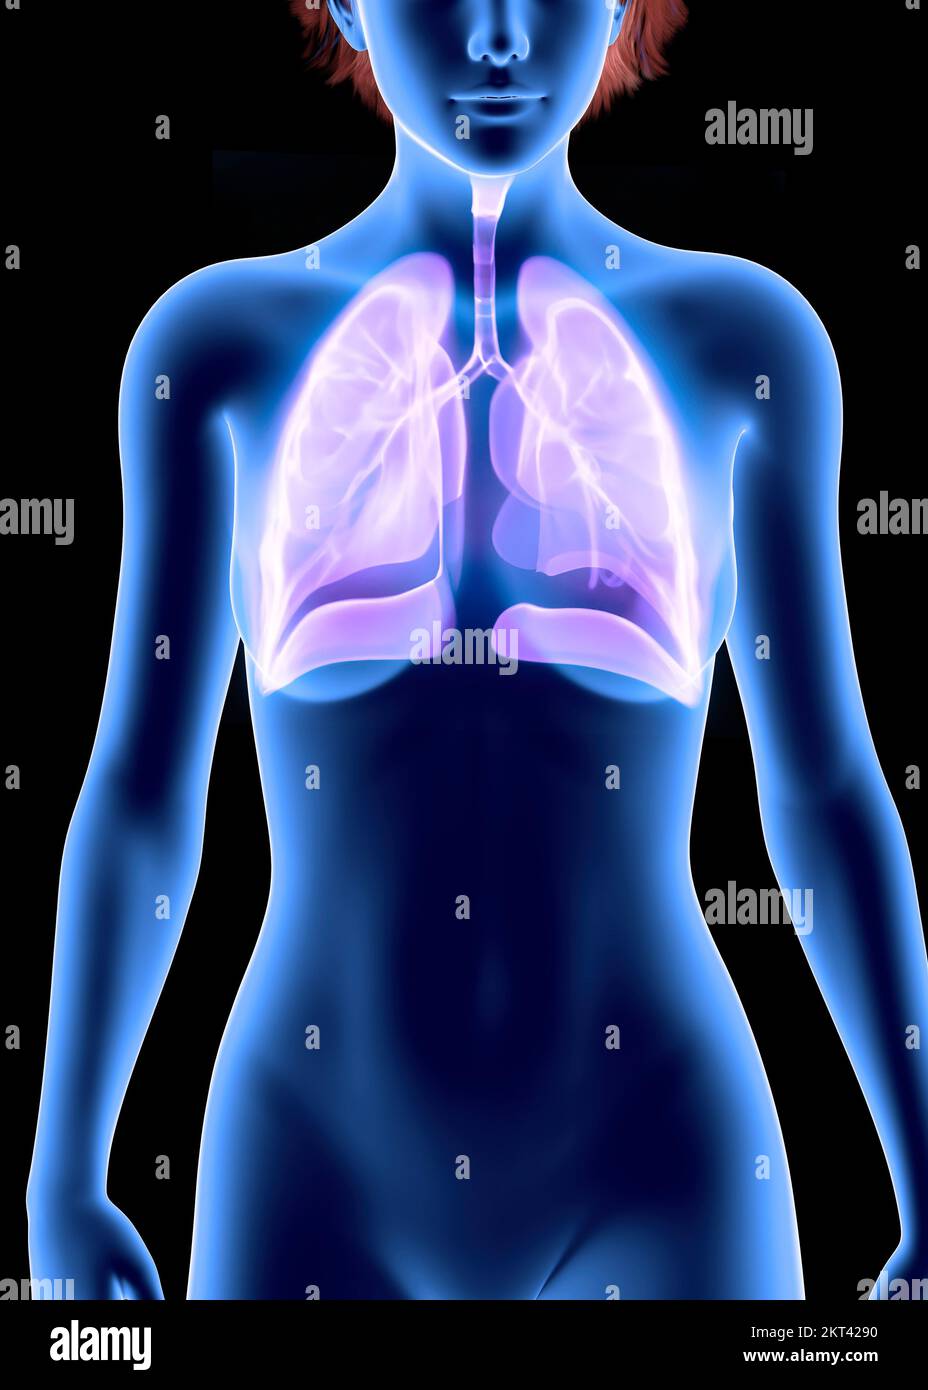 Human anatomy, problems with the respiratory system, severely damaged lungs. Woman silhouette Stock Photo